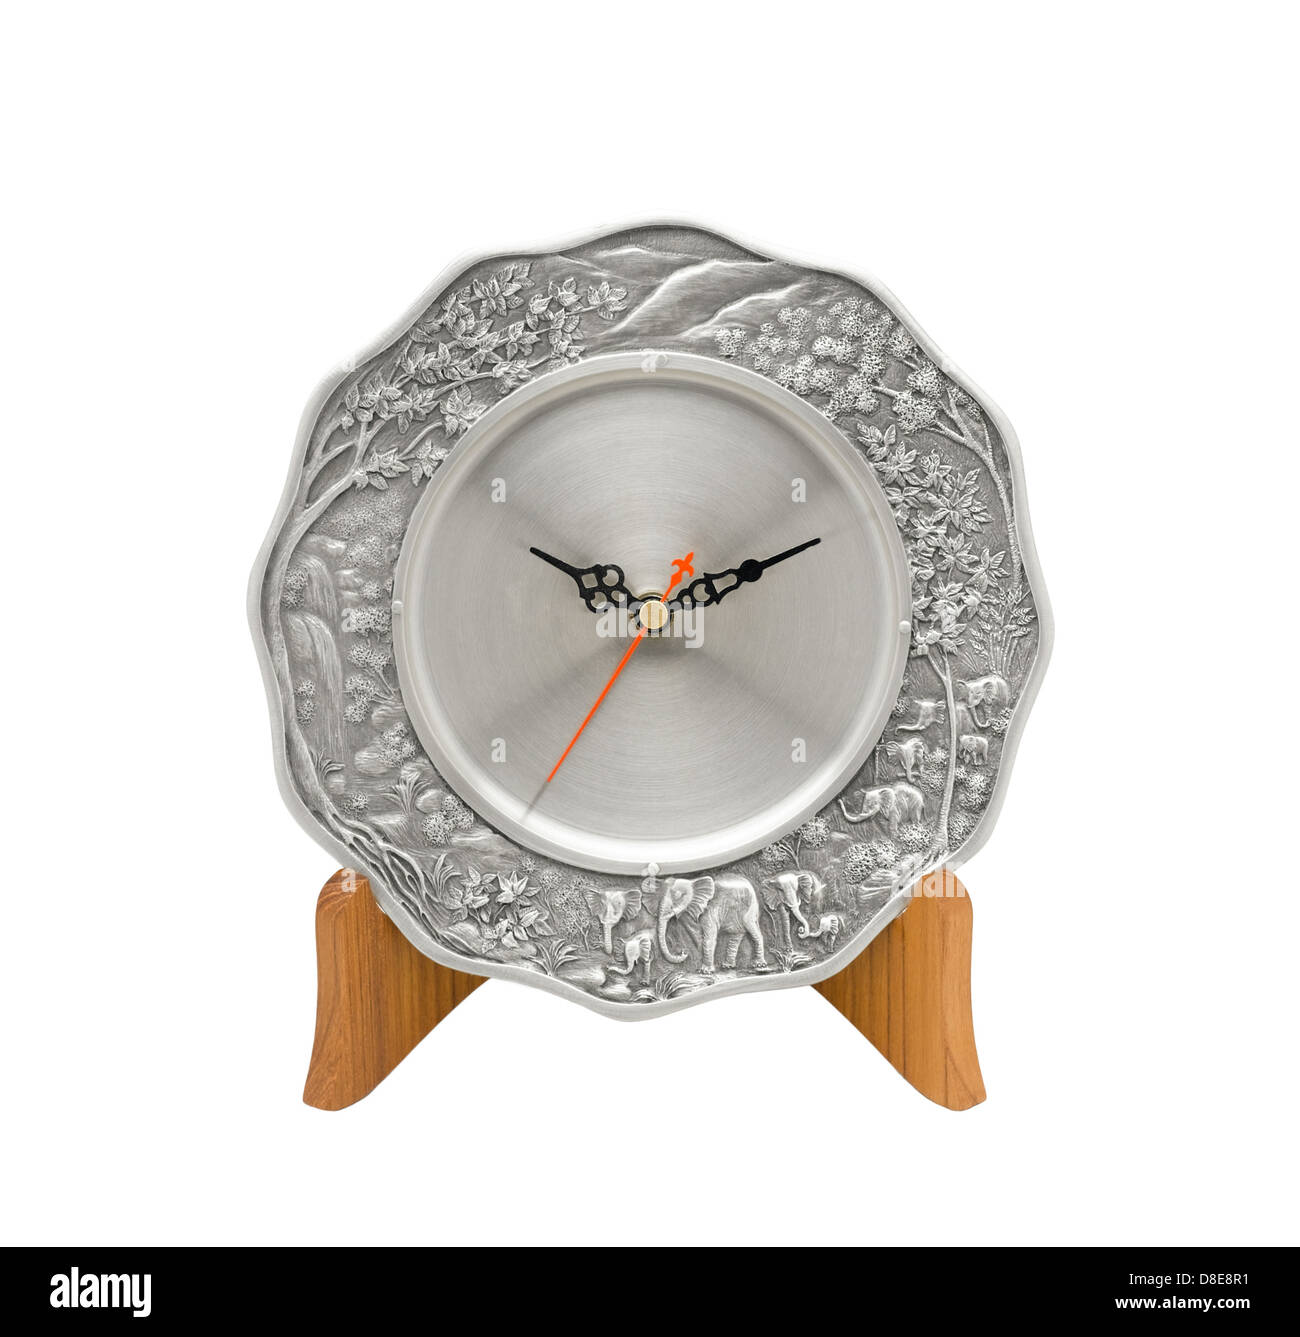 Beautiful plate clock made of pewter on wood stand Stock Photo